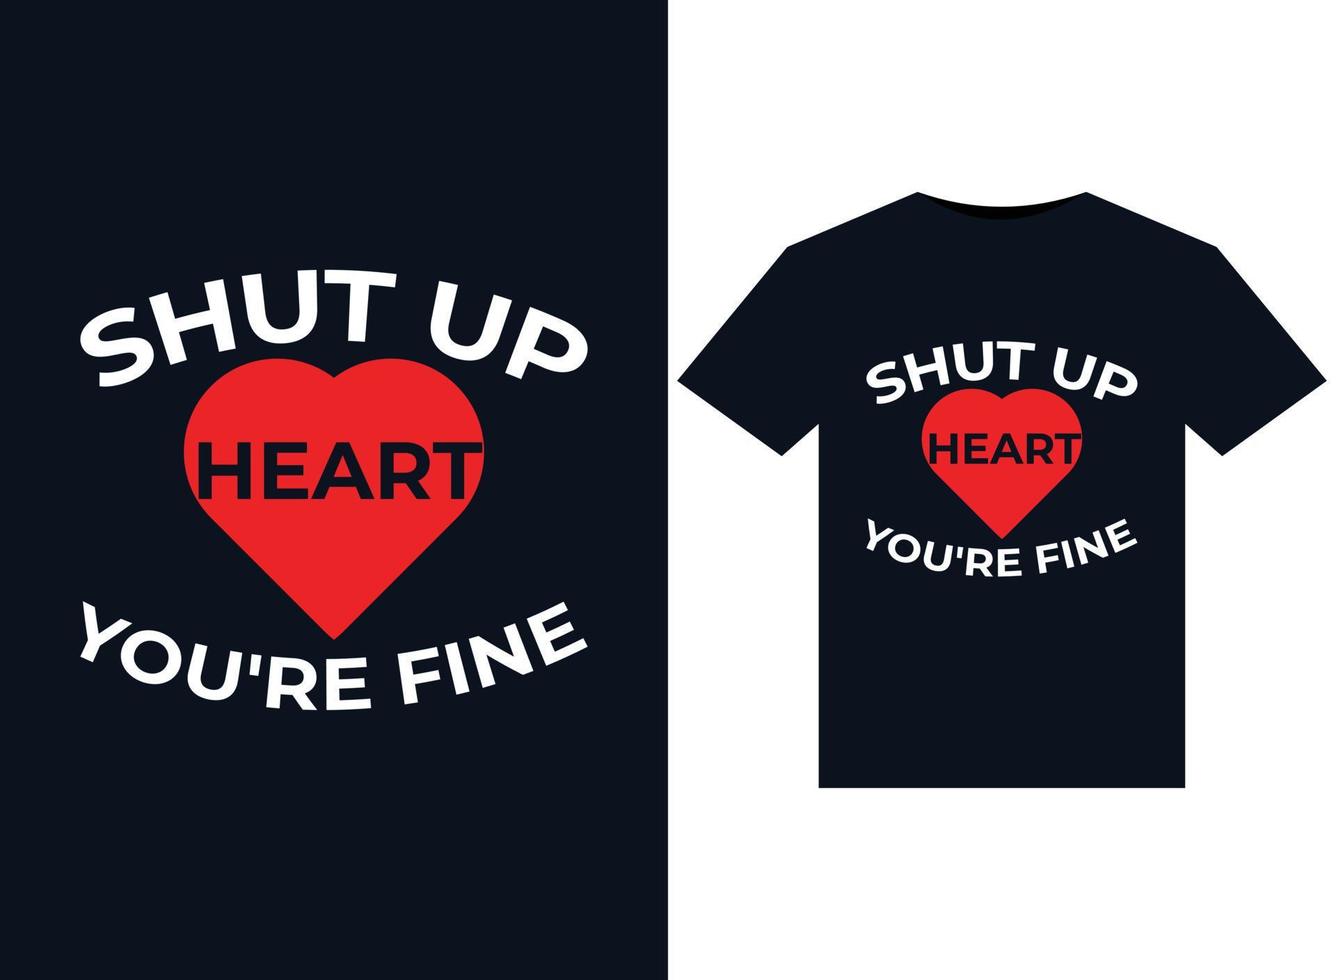 Shut Up Heart You're Fine illustrations for print-ready T-Shirts design vector